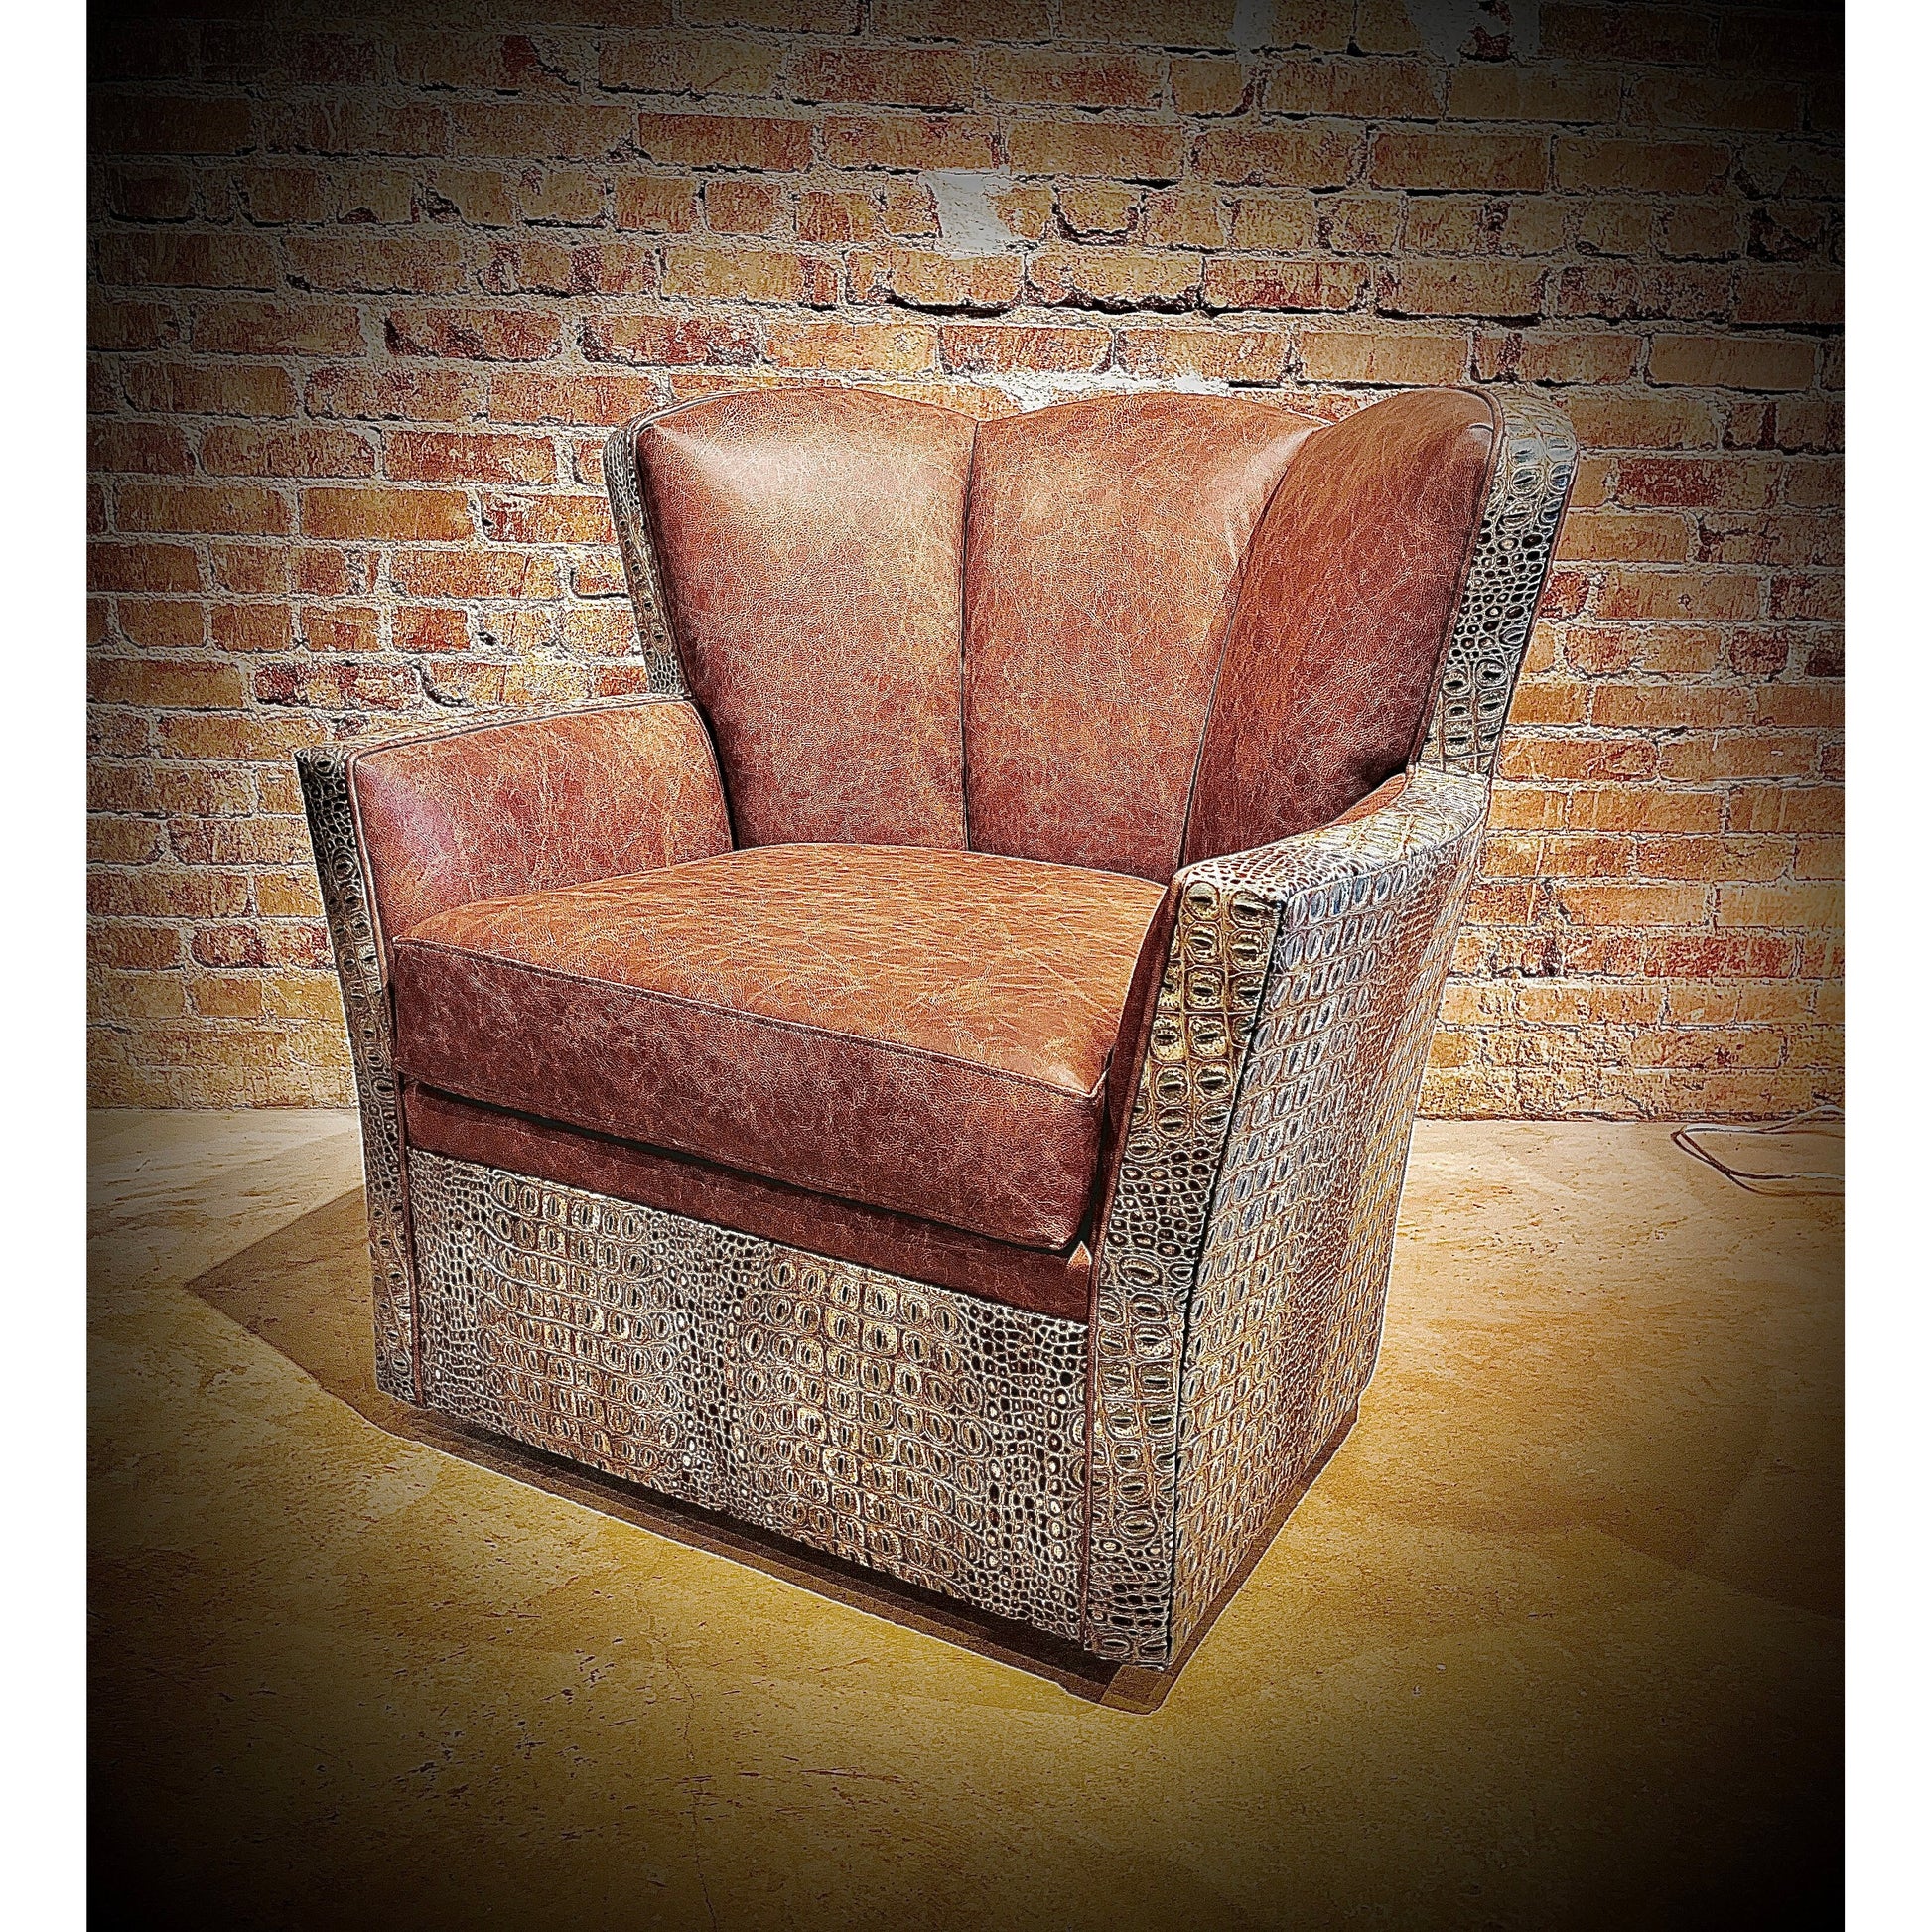 The Fargo Whiskey Croc Chair boasts a sturdy construction and luxurious top grain leather upholstery, featuring an embossed crocodile pattern for a unique and stylish look. Its swivel function allows for easy movement, while providing a comfortable and supportive seat. Upgrade your space with this beautifully-designed, comfortable chair.